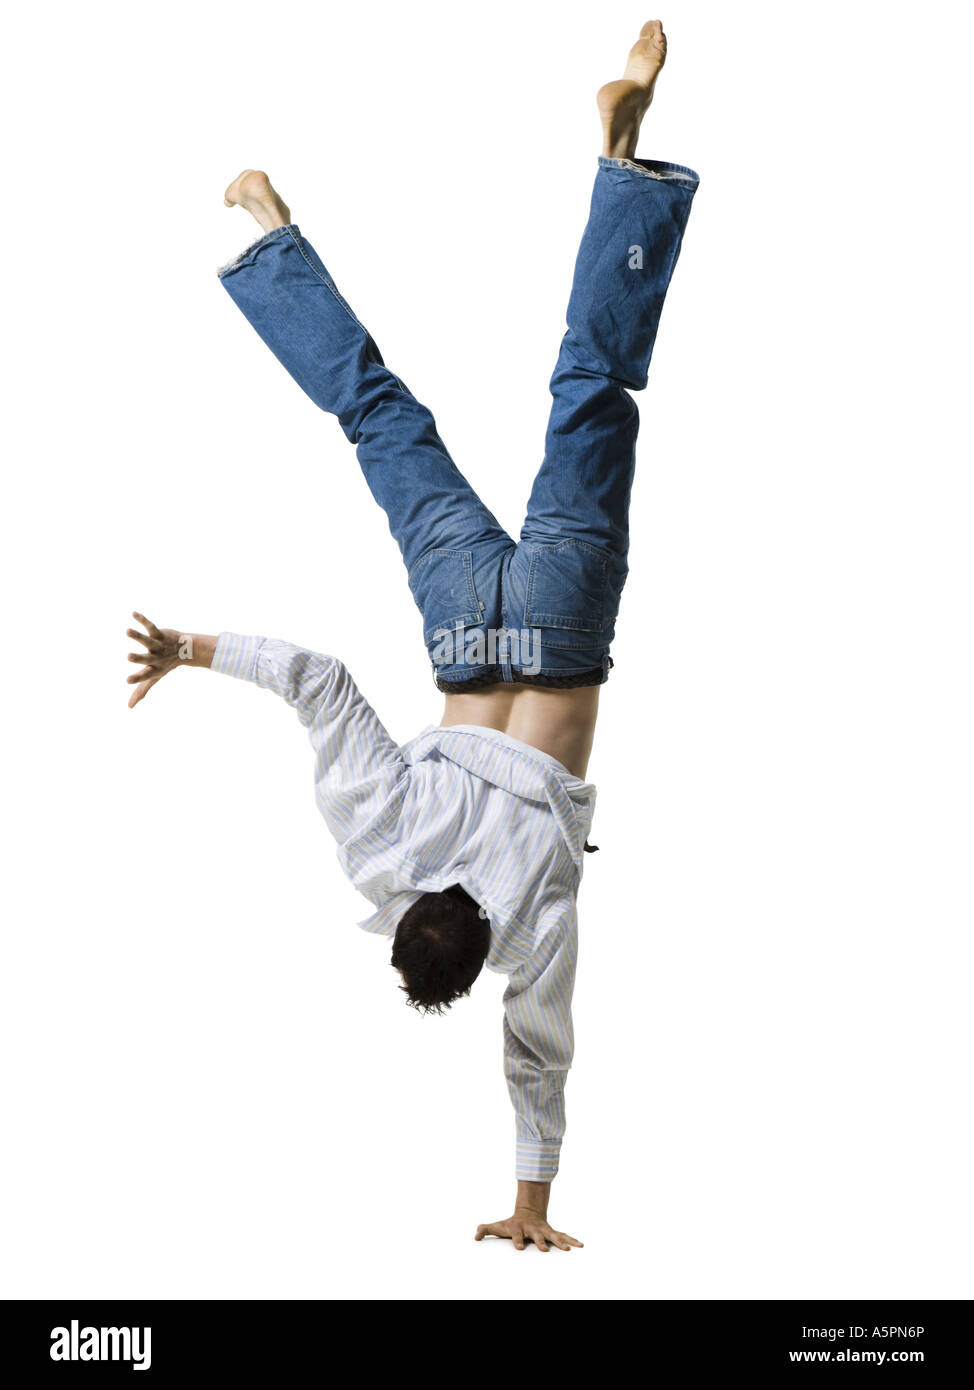 Man doing a one armed handstand Stock Photo